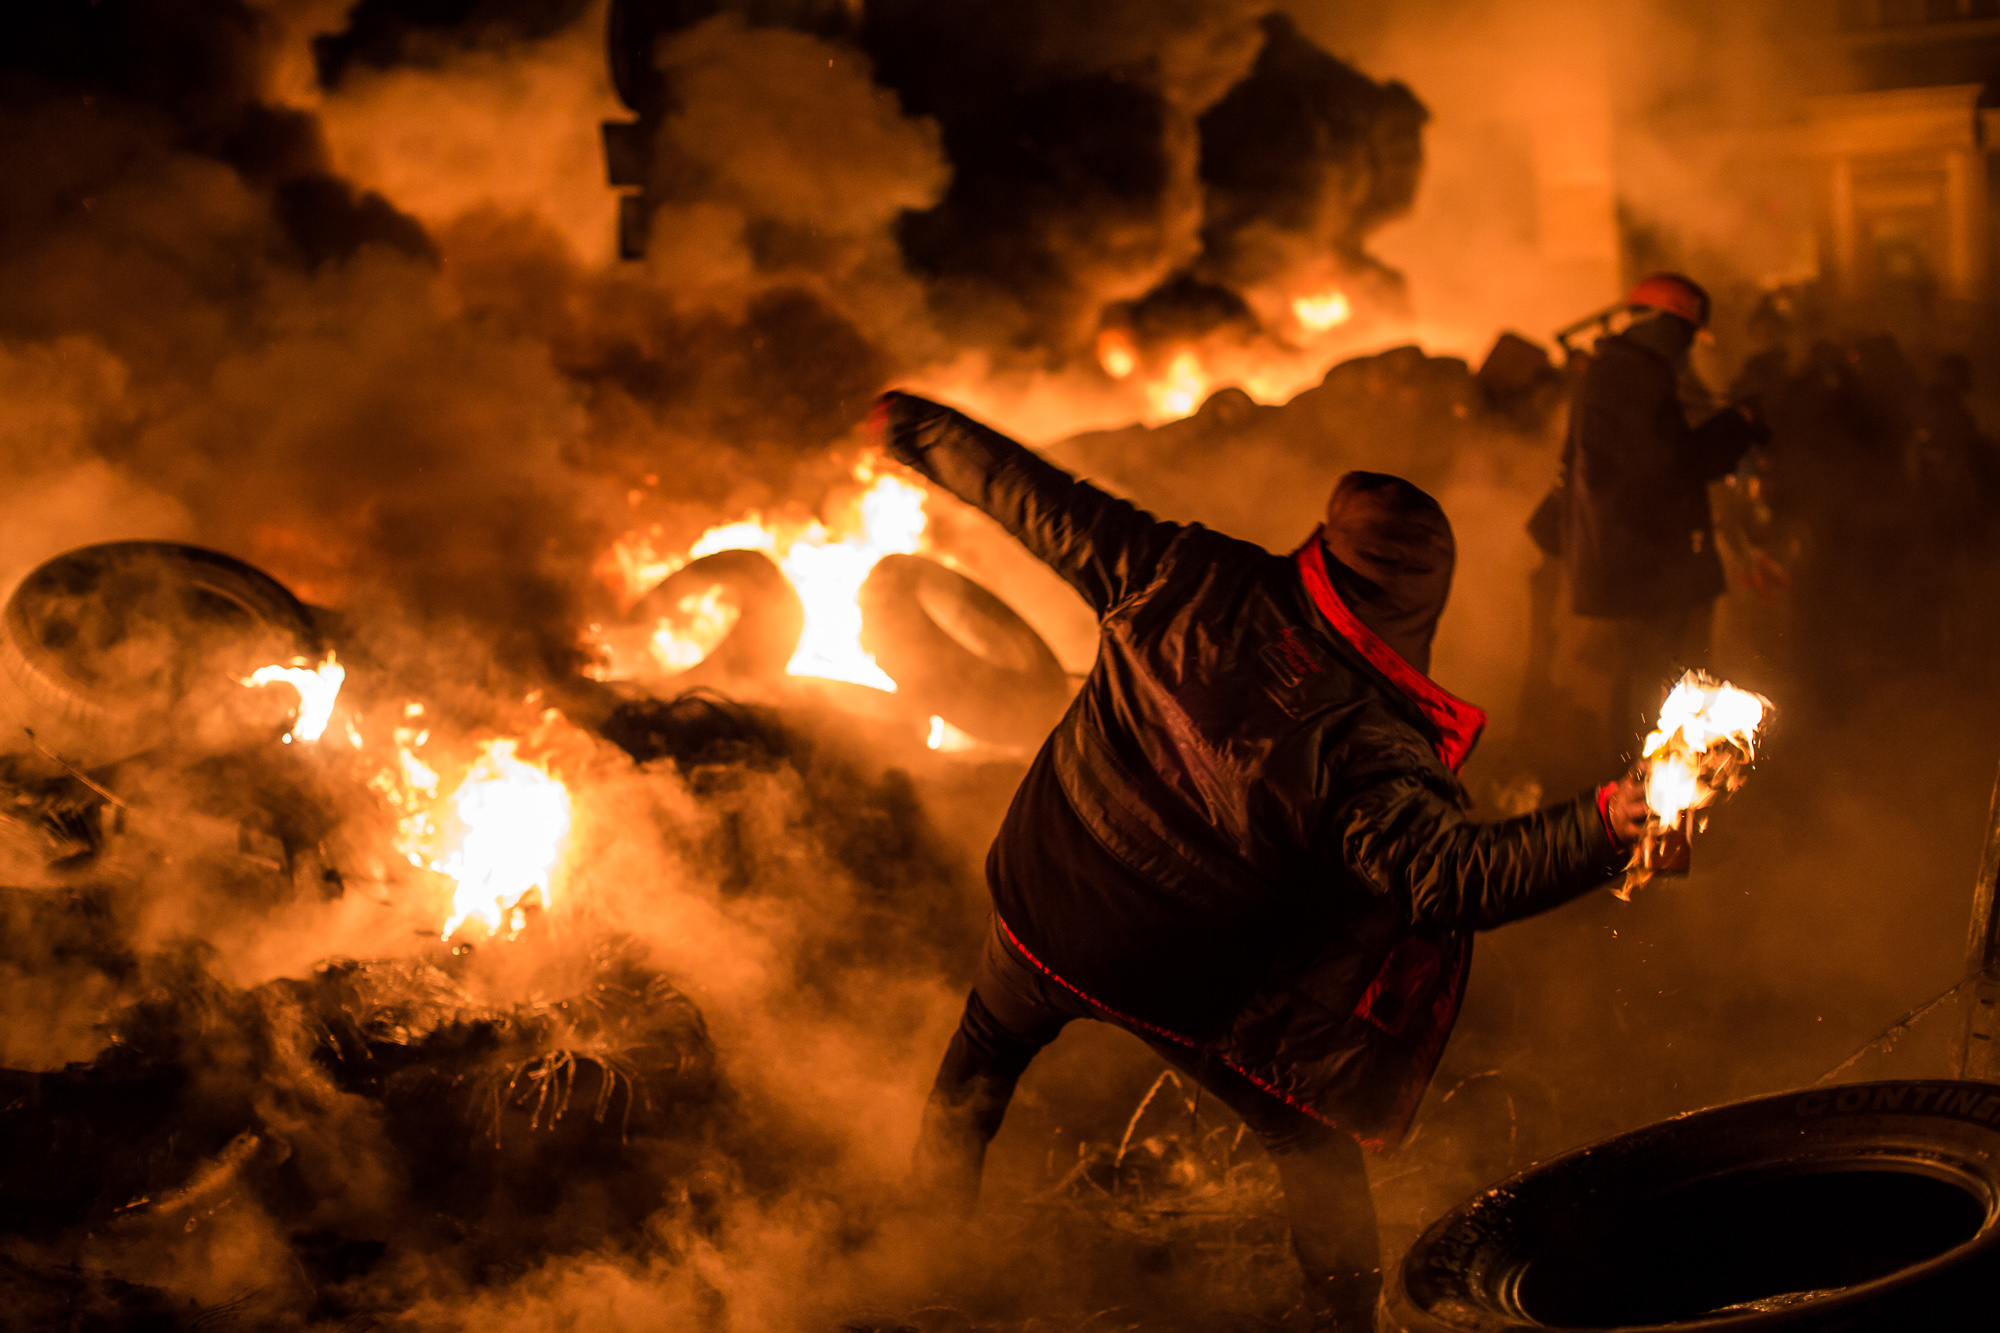  An anti-government protester throws a Molotov cocktail during clashes with police on Hrushevskoho Street near Dynamo stadium on January 25, 2014 in Kiev, Ukraine. After two months of primarily peaceful anti-government protests in the city center, ne